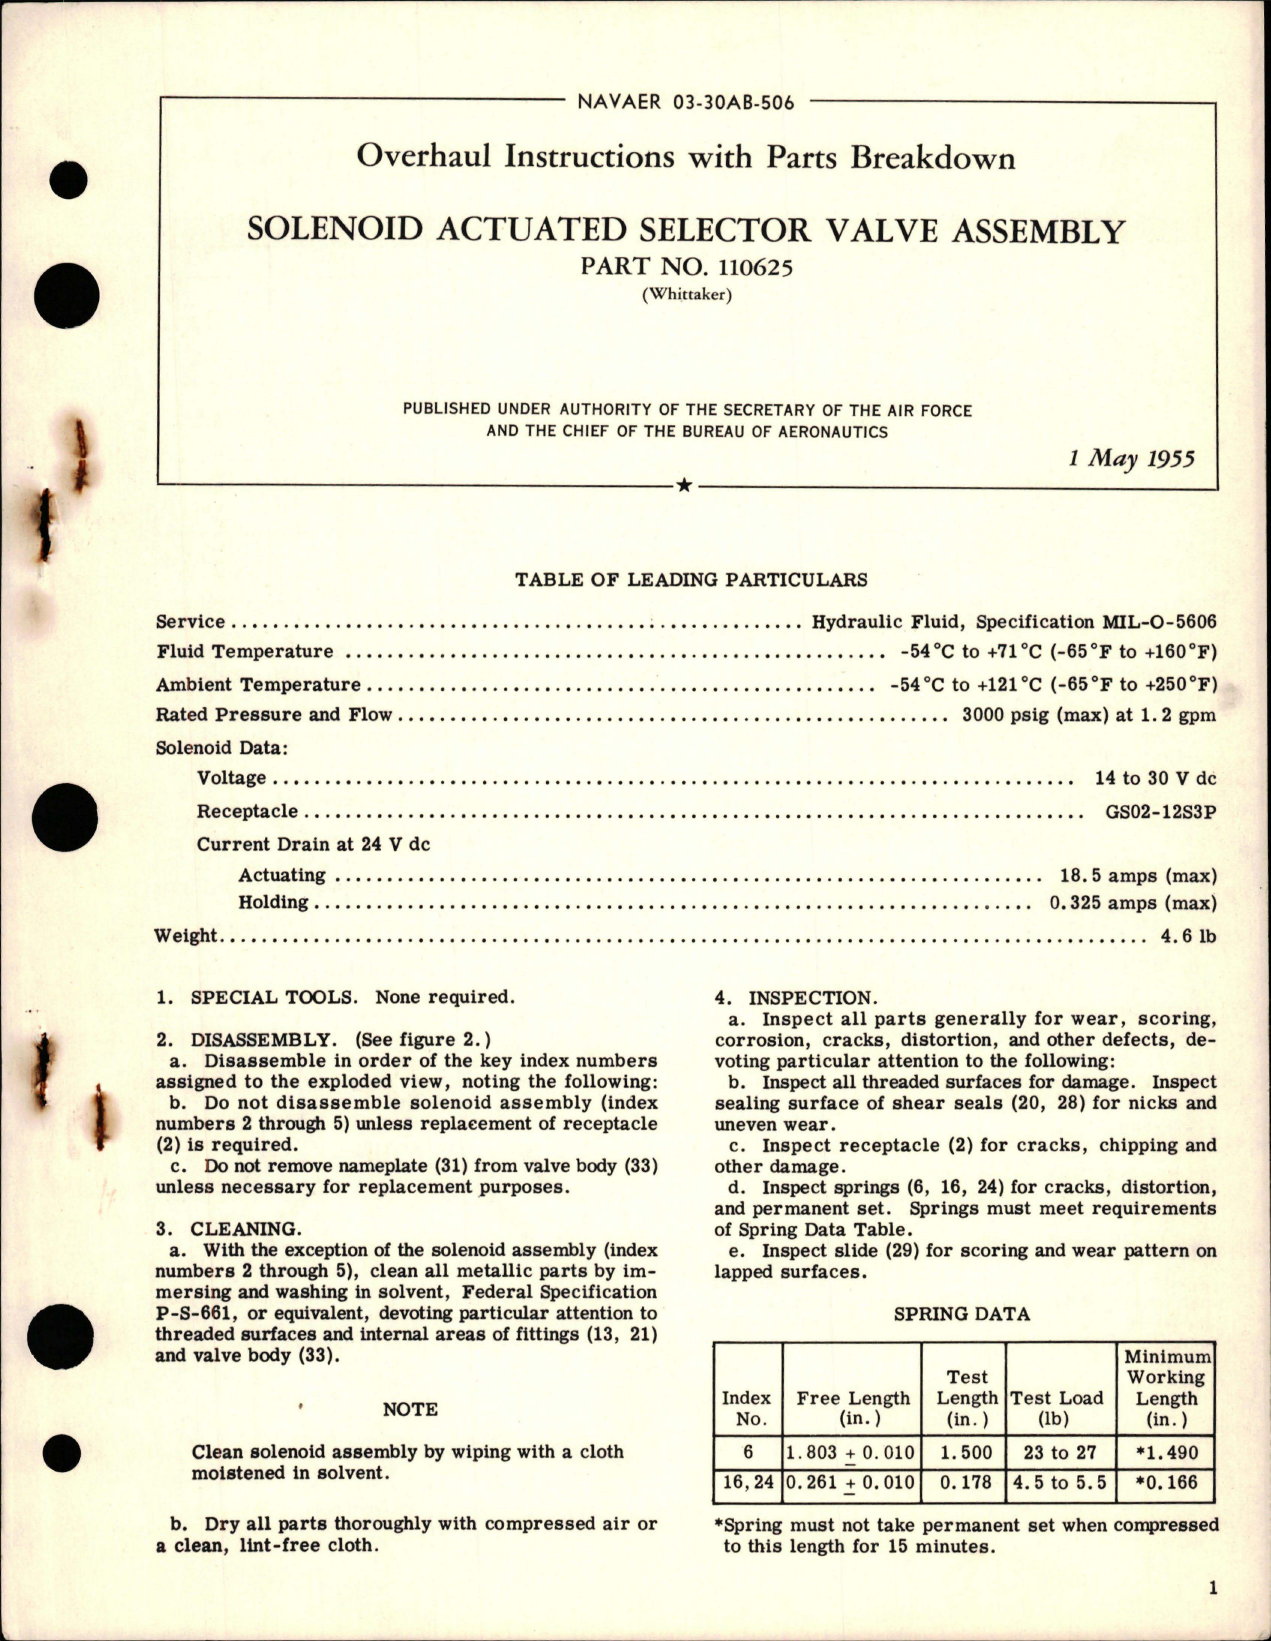 Sample page 1 from AirCorps Library document: Overhaul Instructions with Parts Breakdown for Solenoid Actuated Selector Valve Assembly - Part 110625 